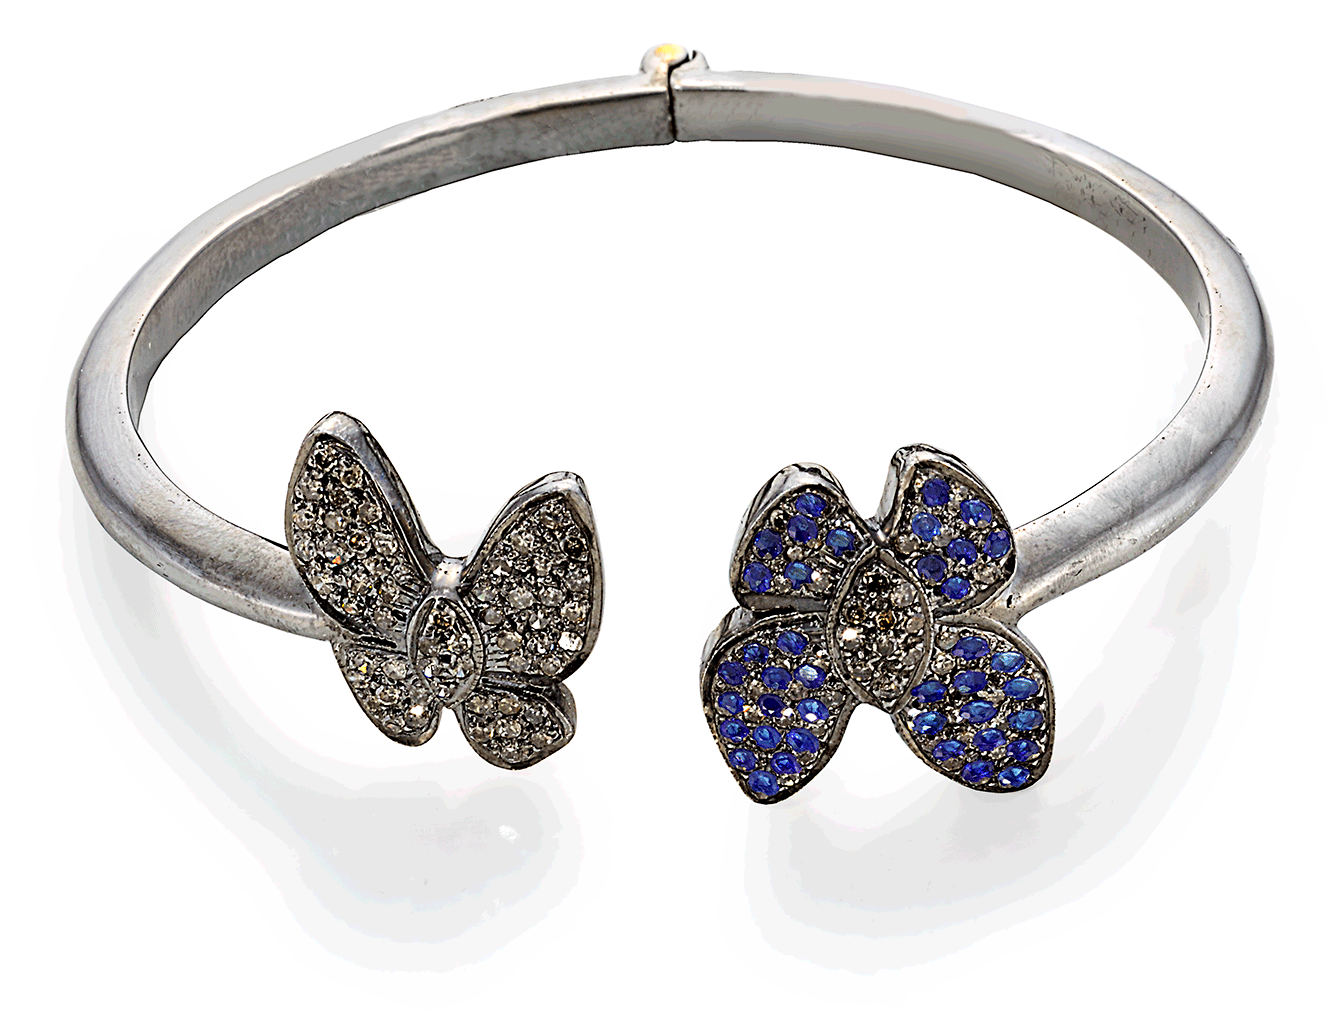 Pave Butterfly design GIF animation of bracelet on white background showing stones switching back and forth